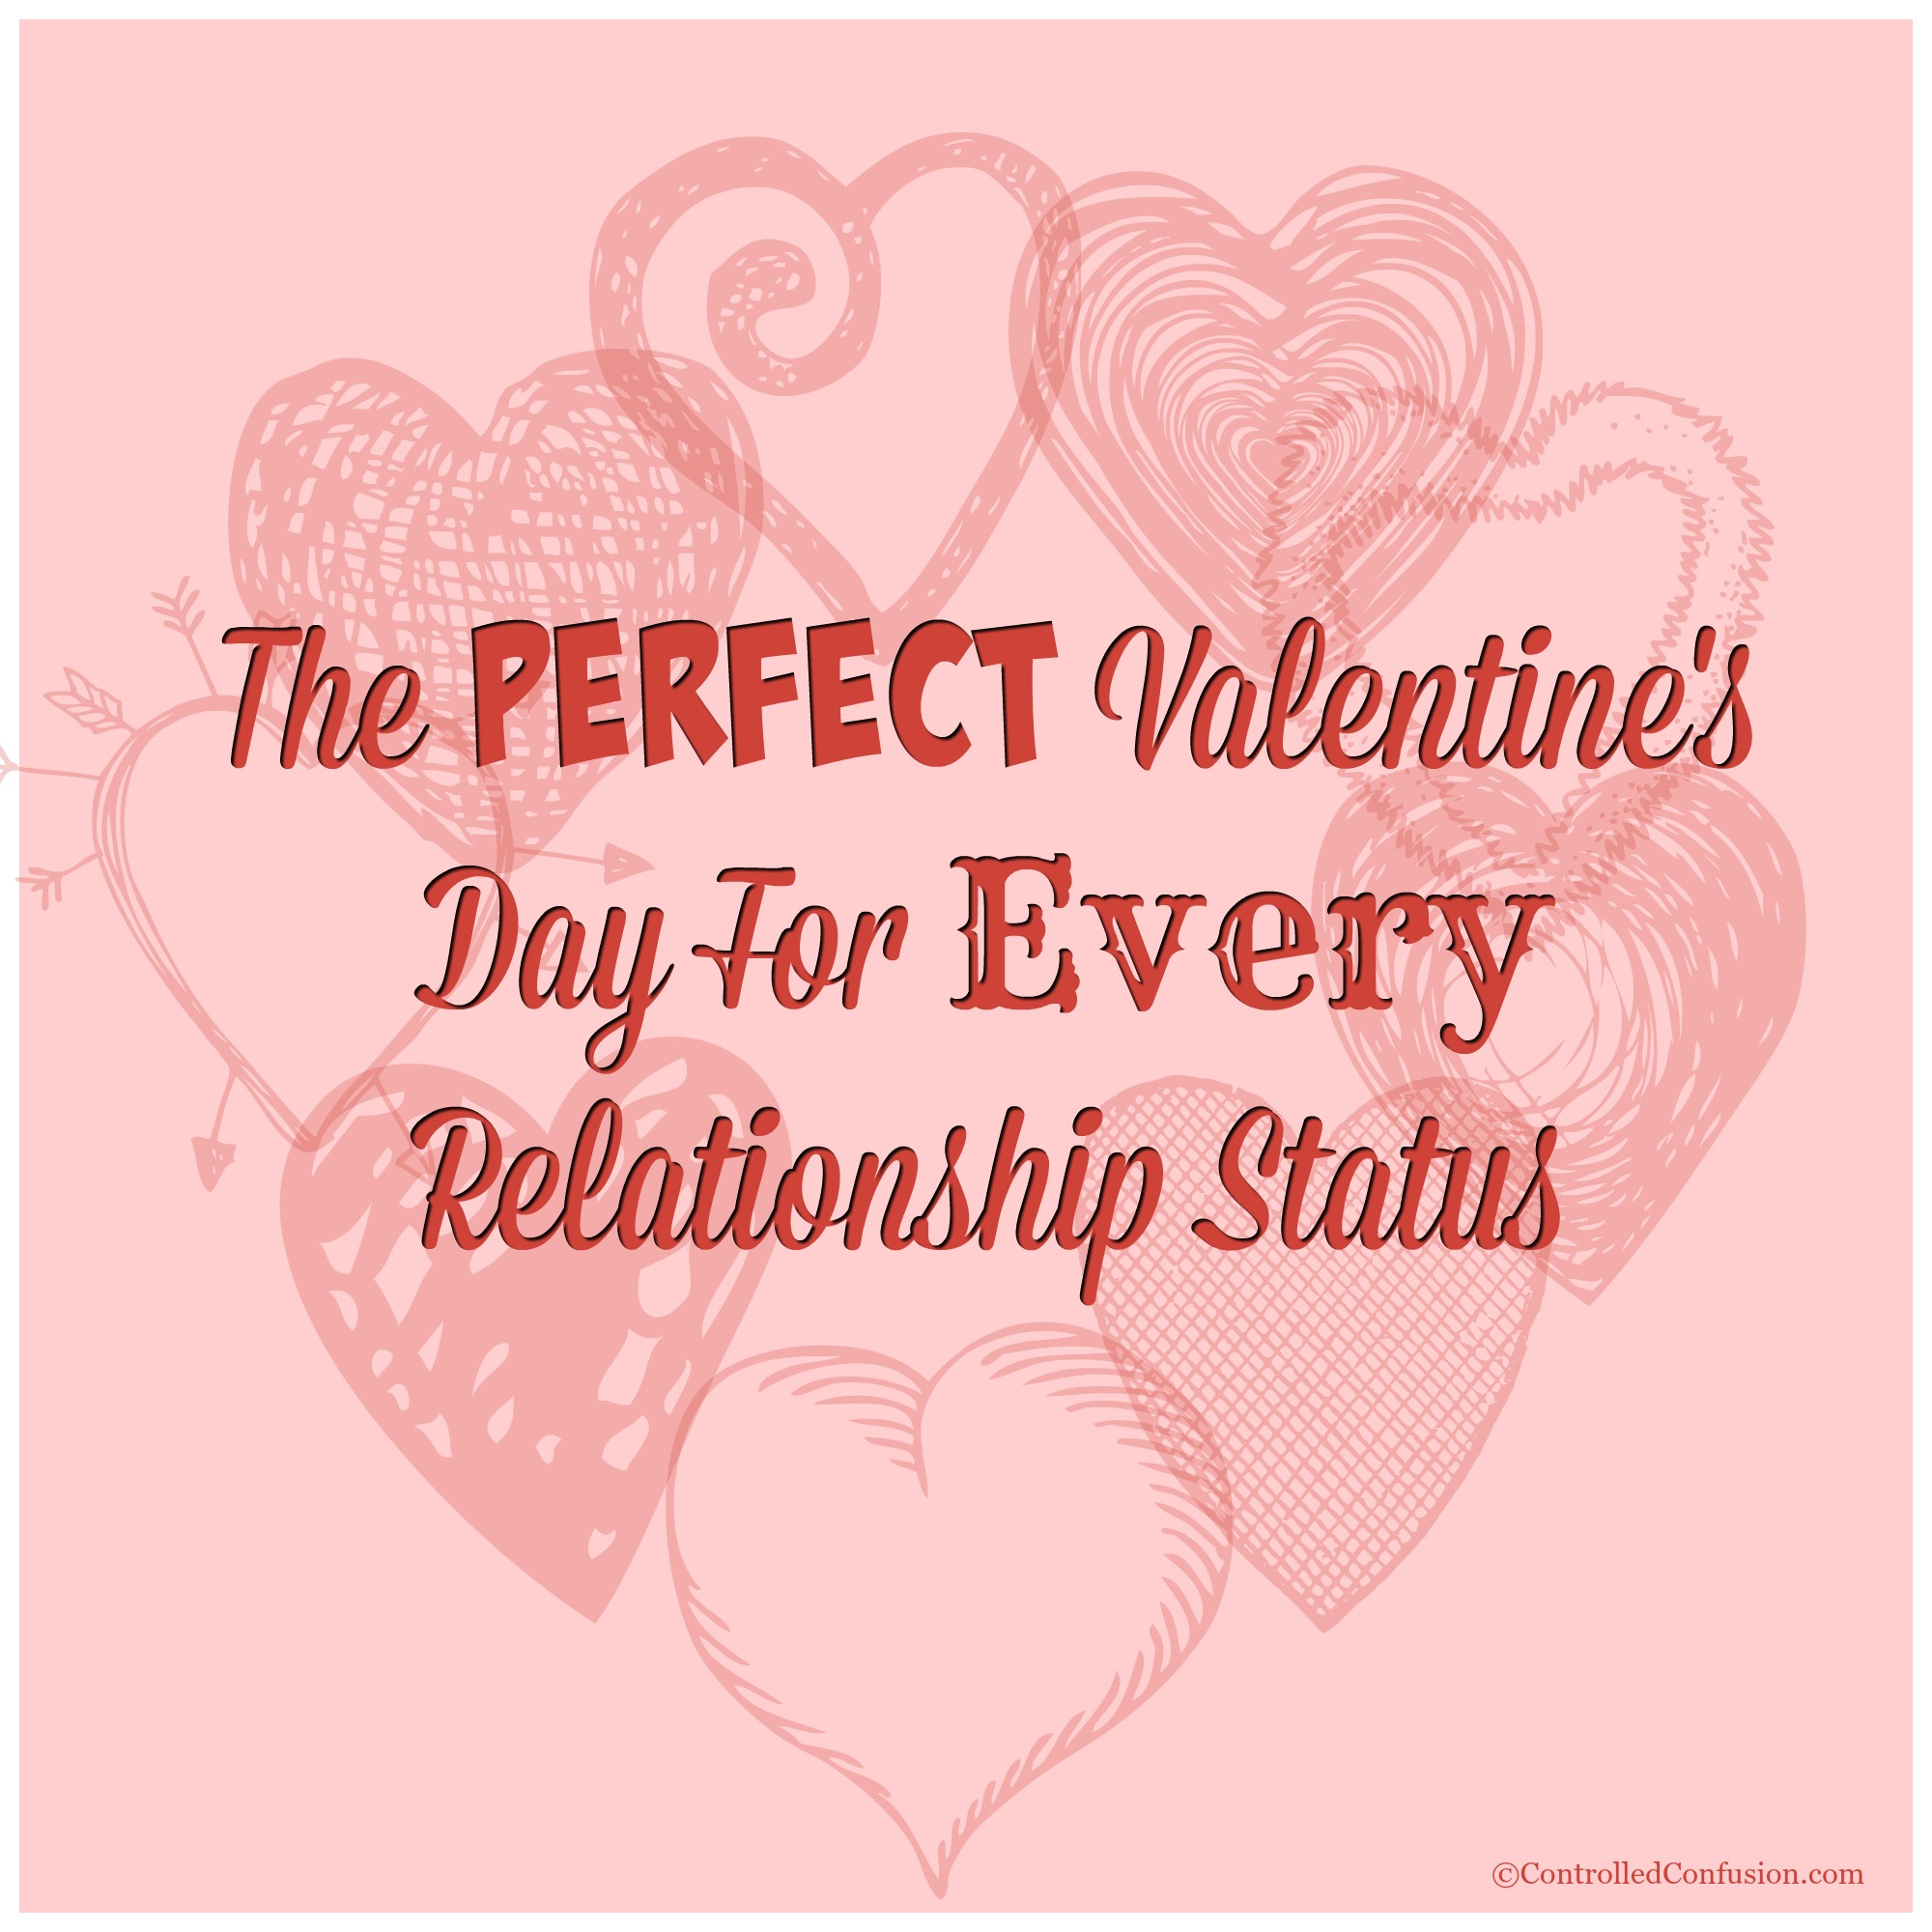 The Perfect Valentine’s Day For Every Relationship Status